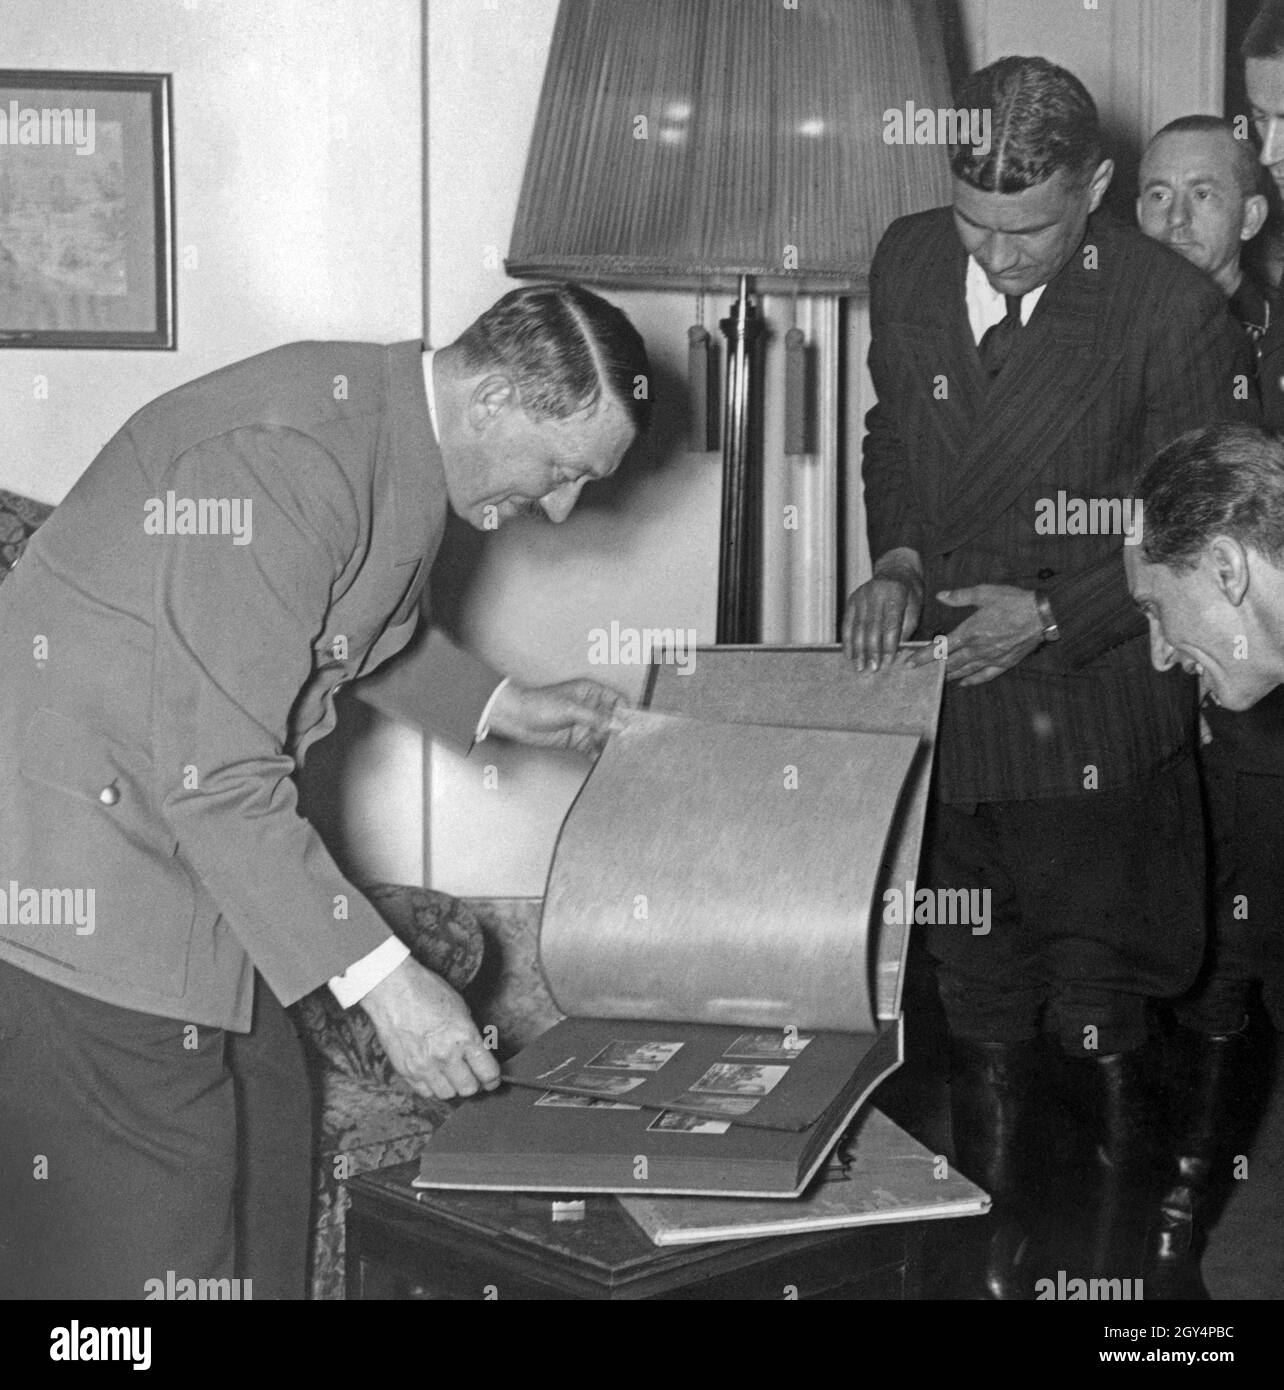 Adolf Hitler is presented with a photo album for his birthday in the Reich Chancellery by (from left) Fritz Wiedemann, Otto Dietrich, Karl Brandt, Max Amann and Joseph Goebbels. [automated translation] Stock Photo